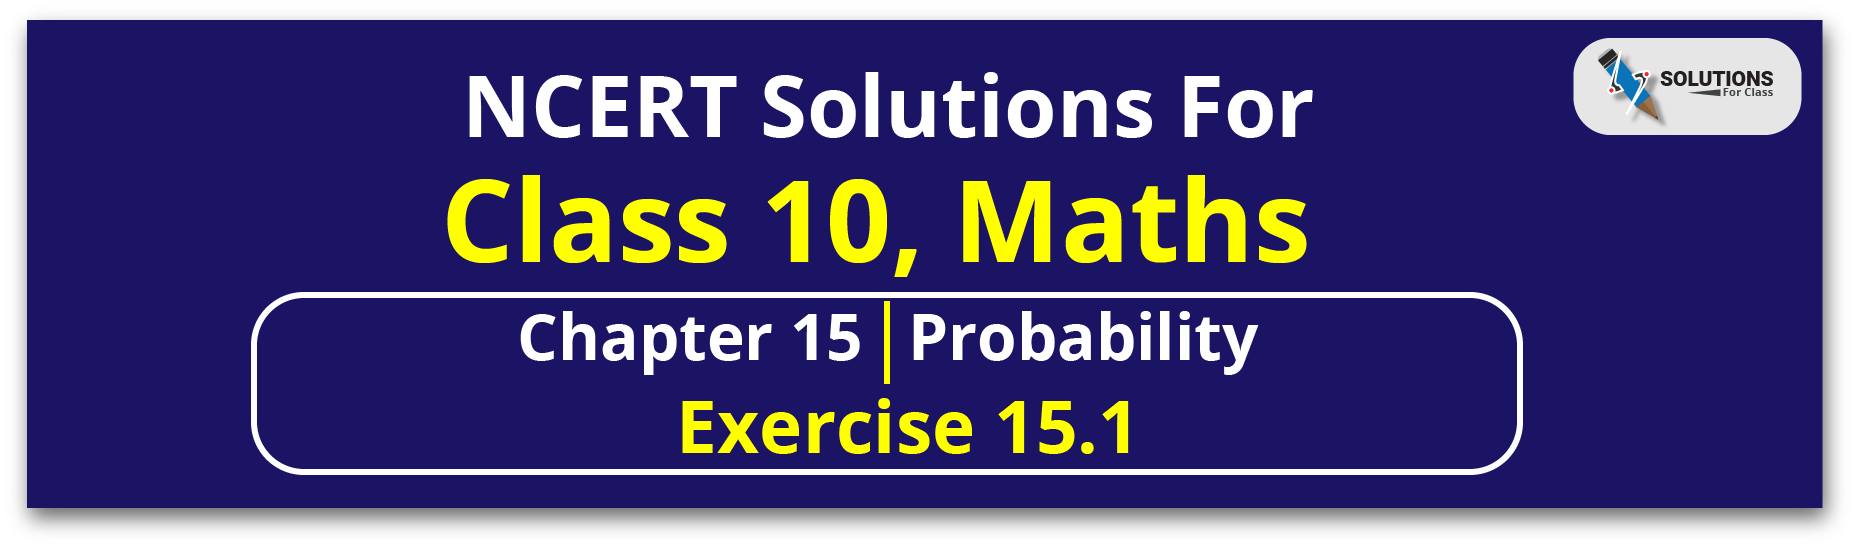 NCERT Solution For Class 10, Maths, Chapter 15, Probability, Exercise 15.1